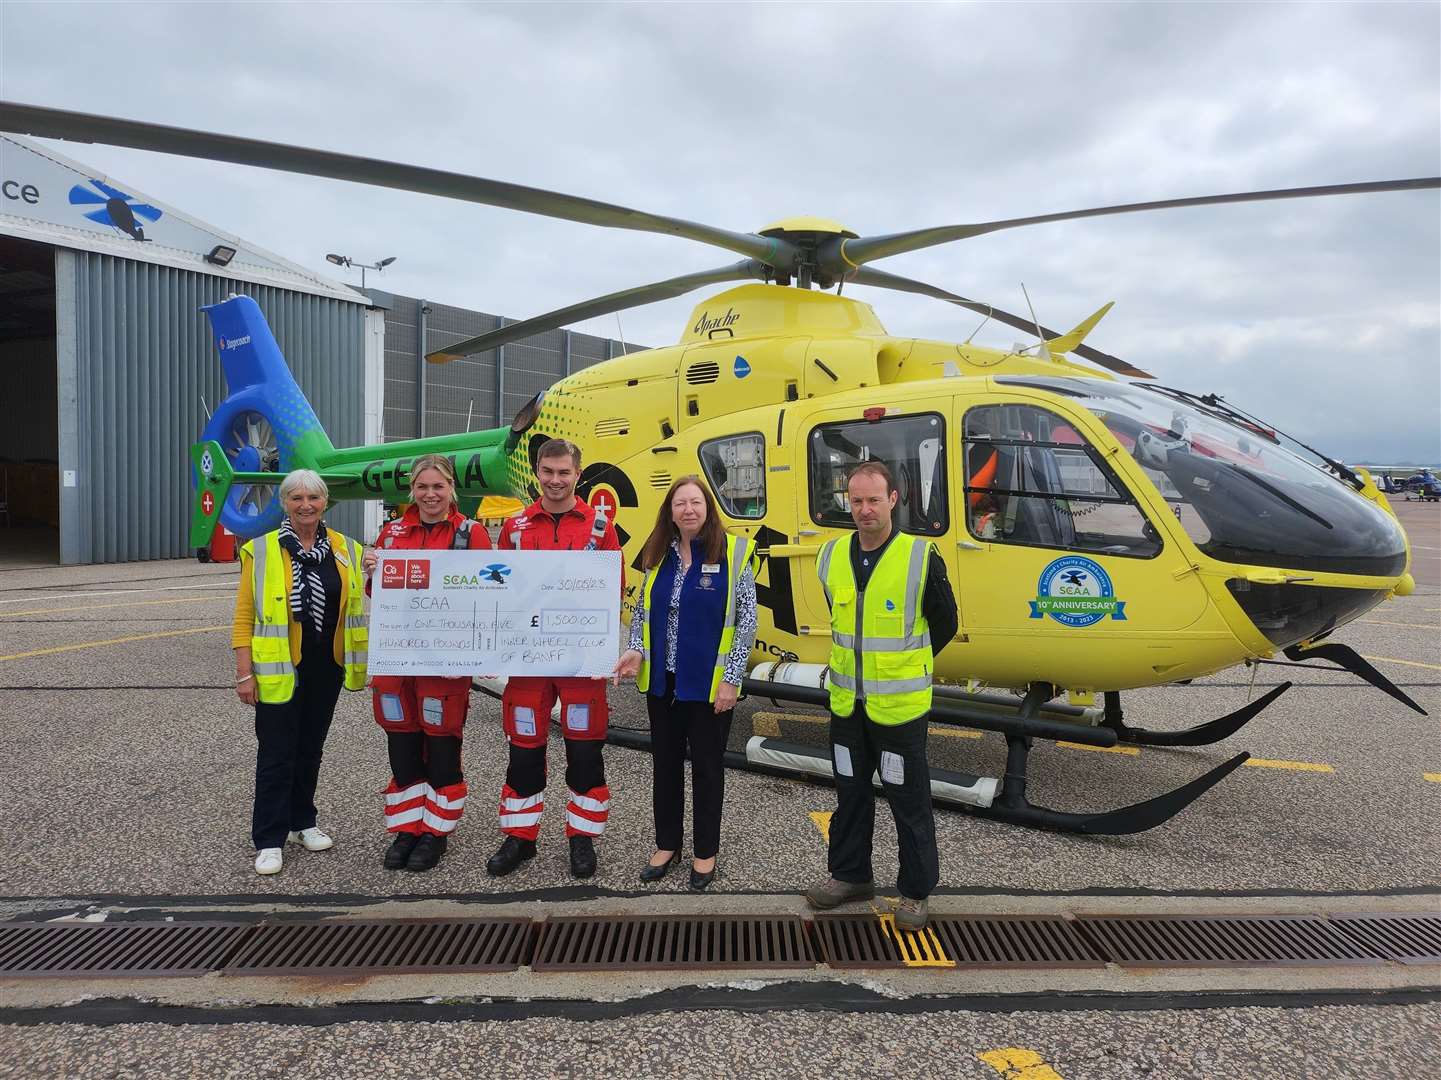 Inner Wheel Club of Banff president Teresa Ruparelia and Sandra Leith present the donation to the Scottish Charity Air Ambulance helicopter crew.